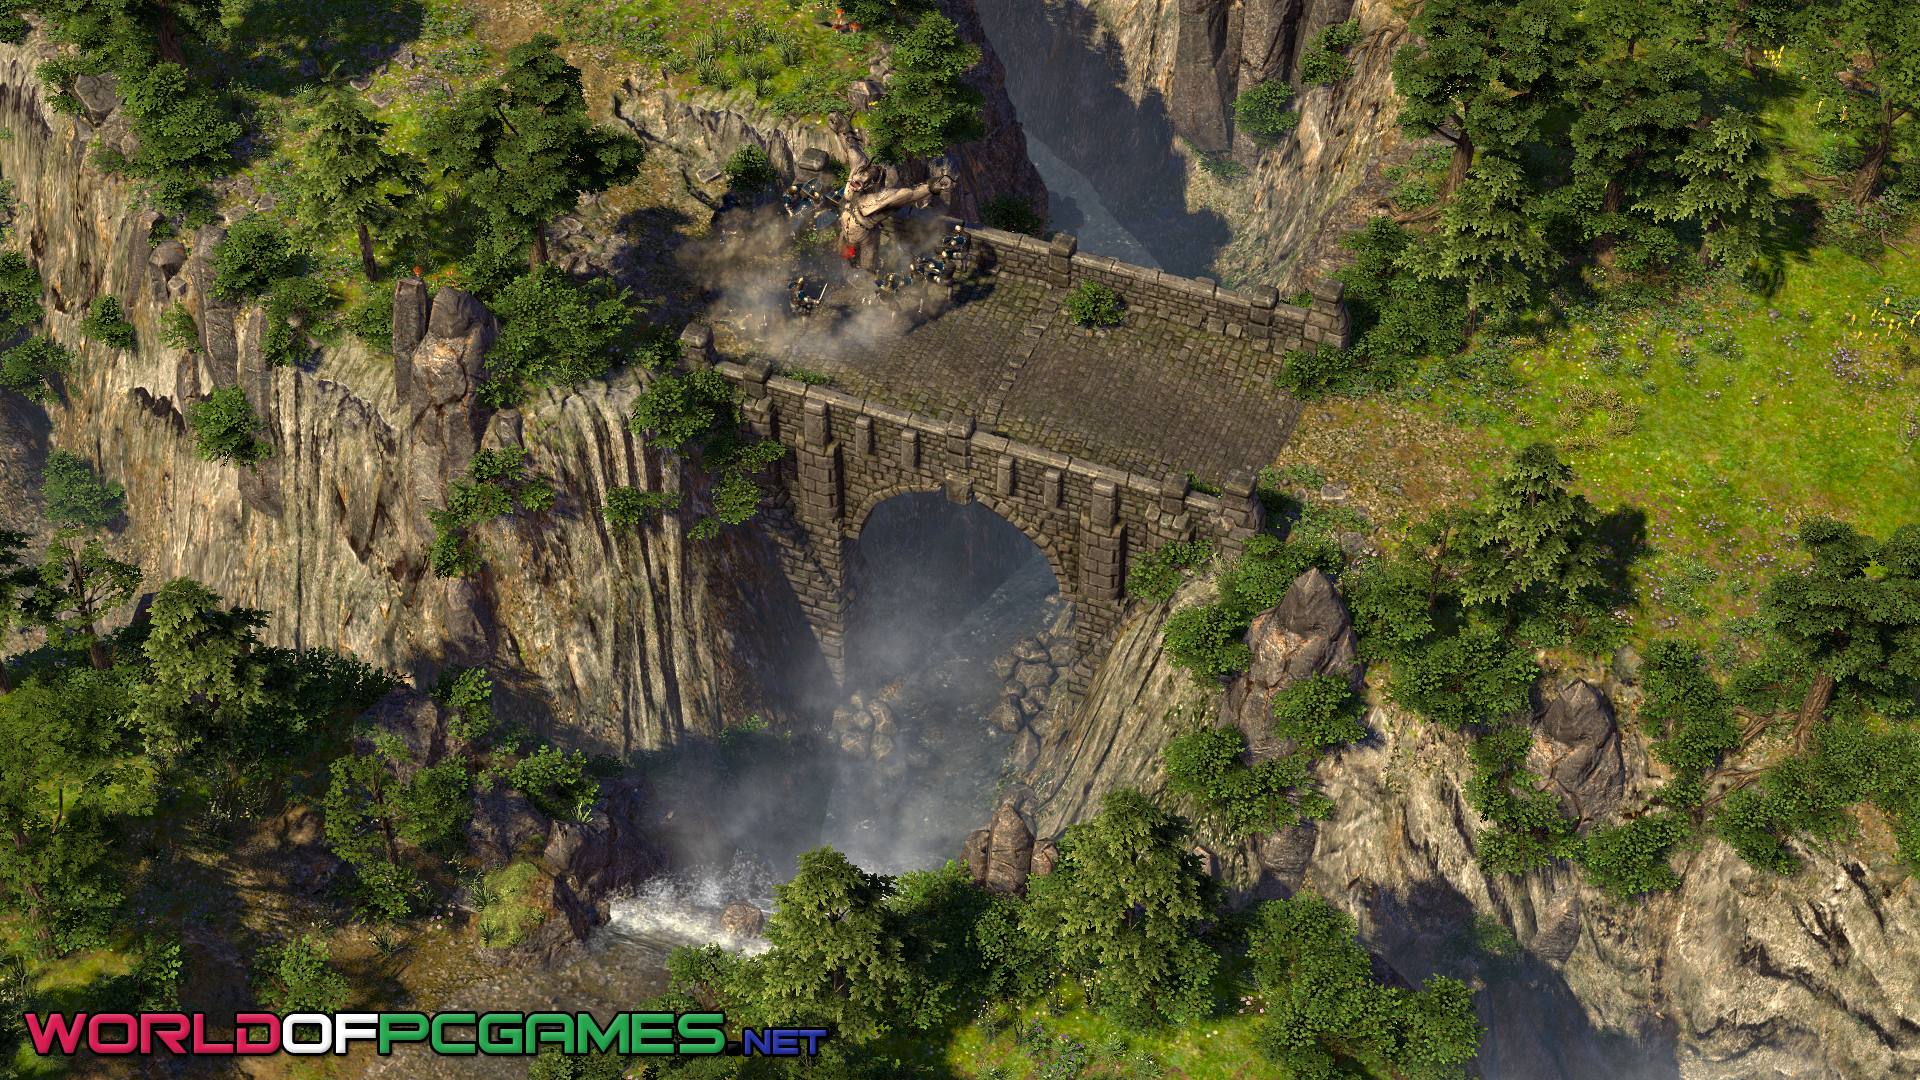 Spellforce 3 PC Game Free Download By worldof-pcgames.net